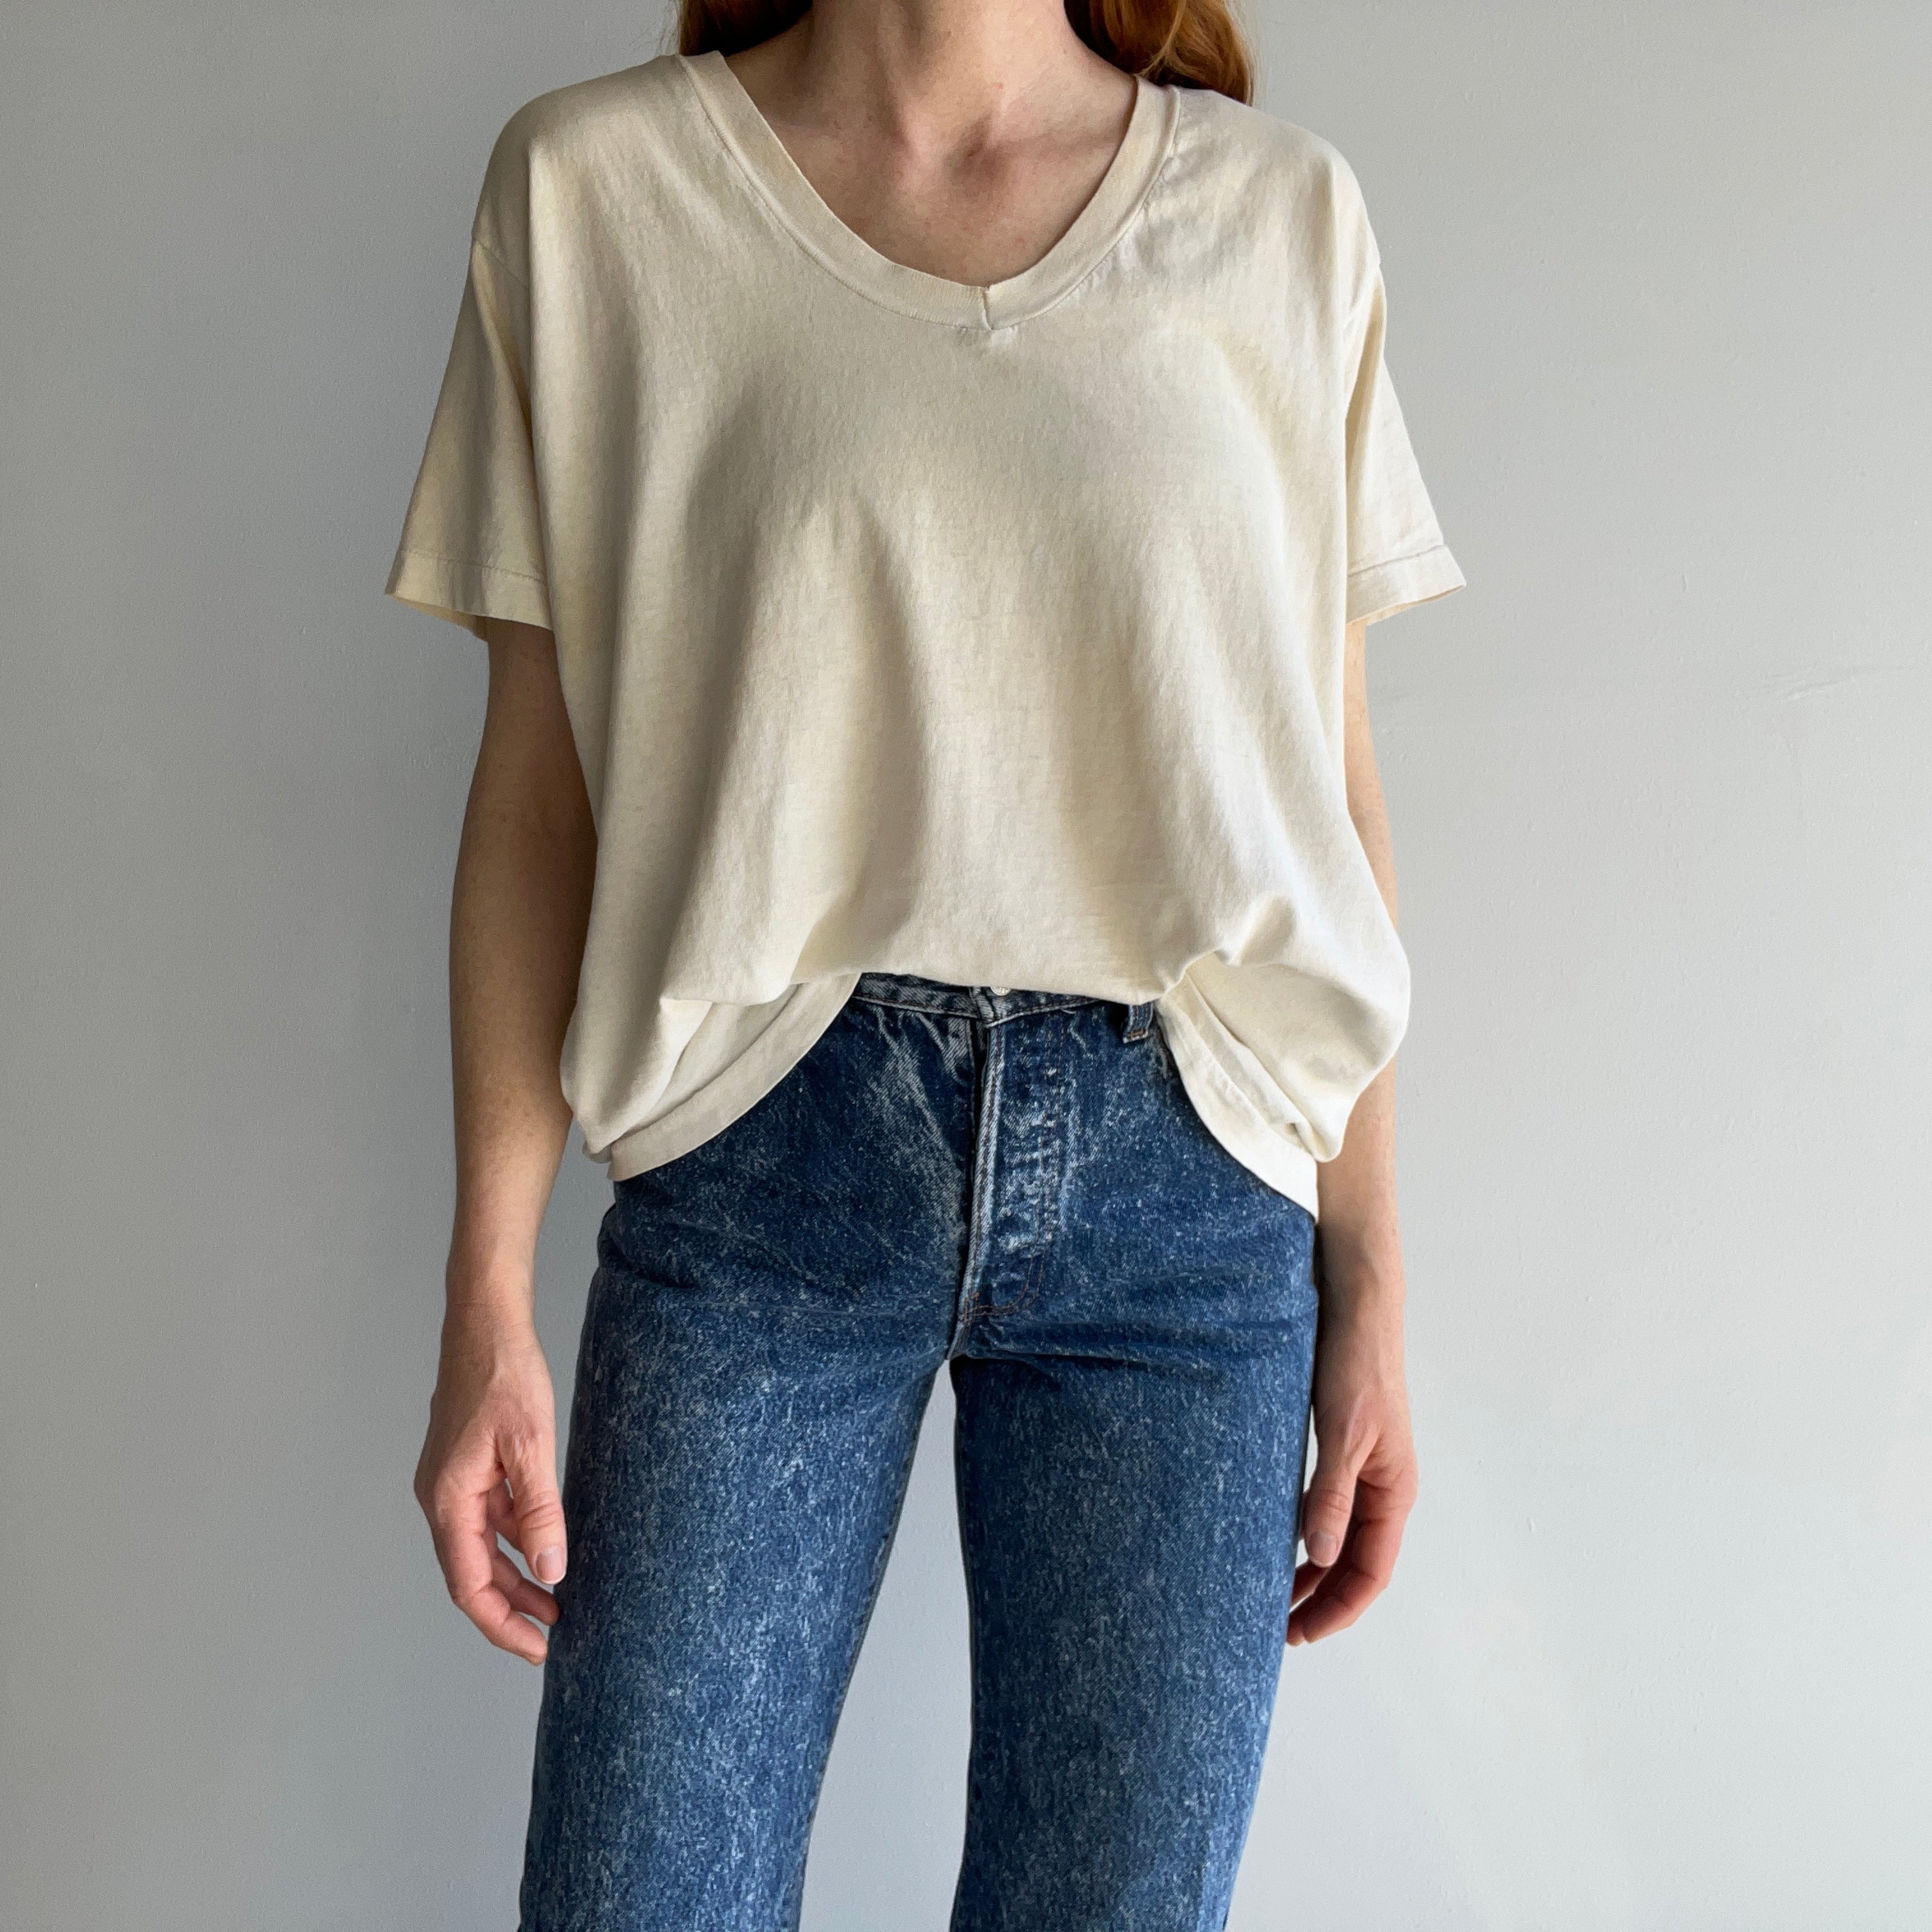 1990s Majorly Aged Stained Formerly White V-Neck Cotton T-Shirt by FOTL